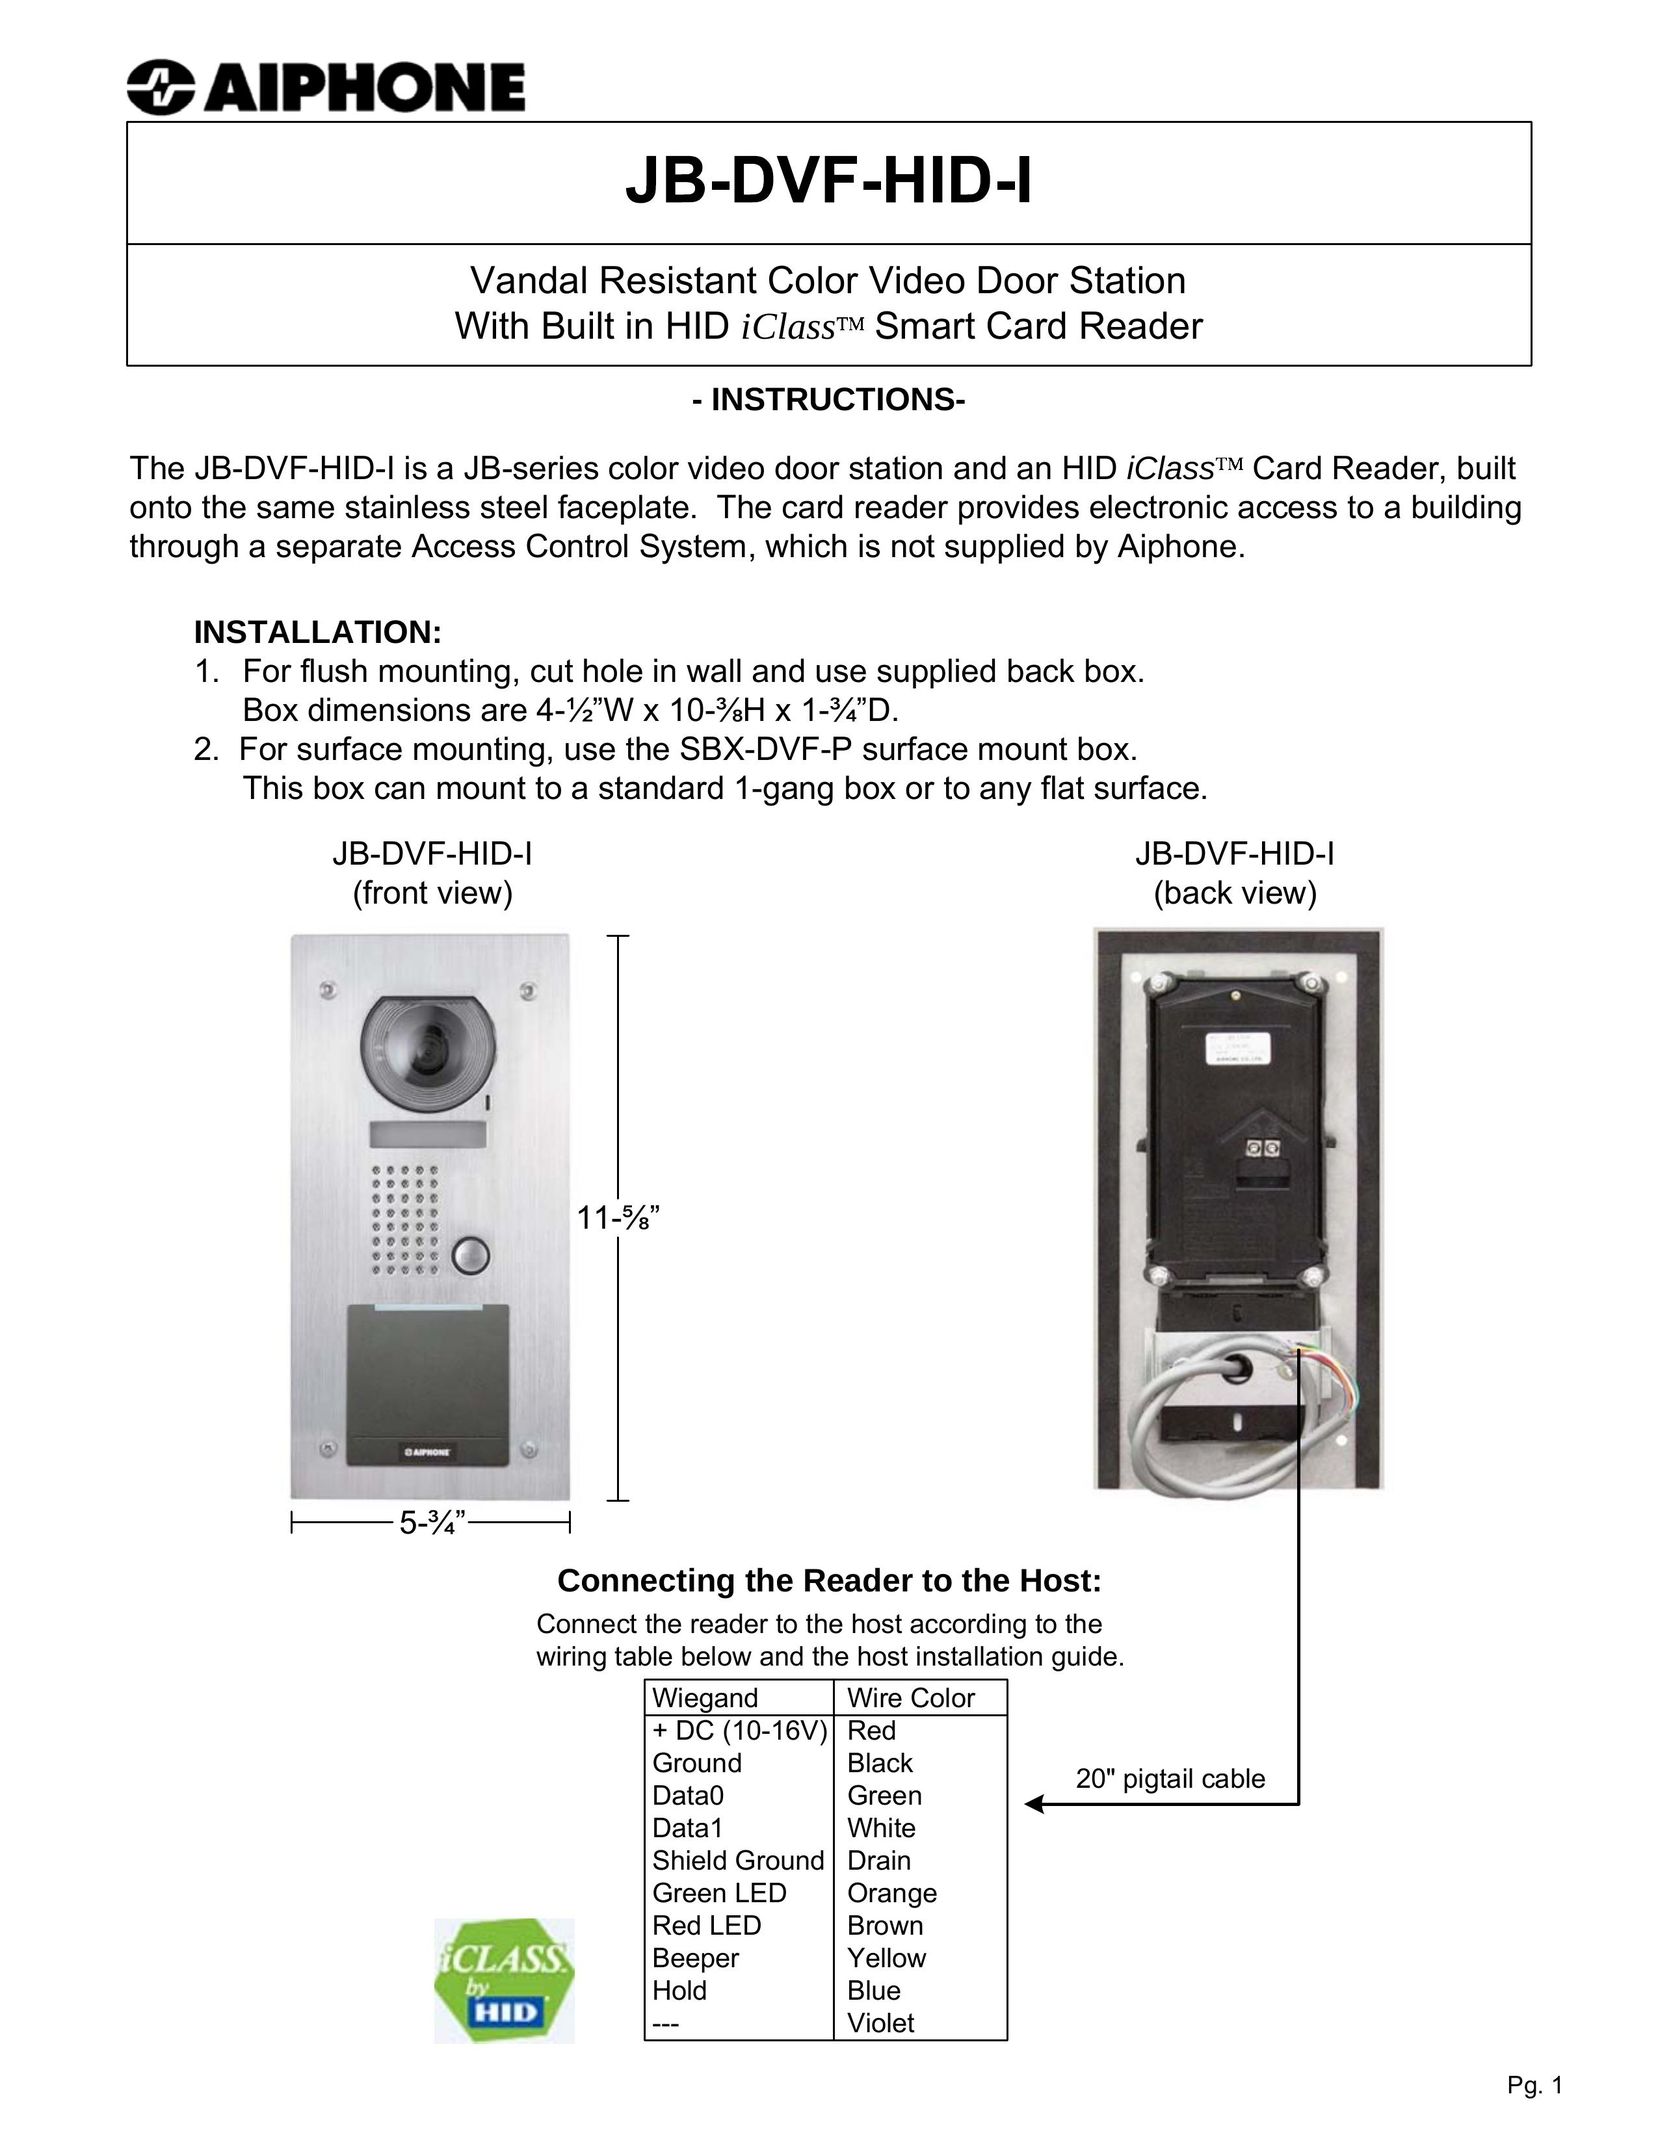 Aiphone JB-DVF-HID-I Home Security System User Manual